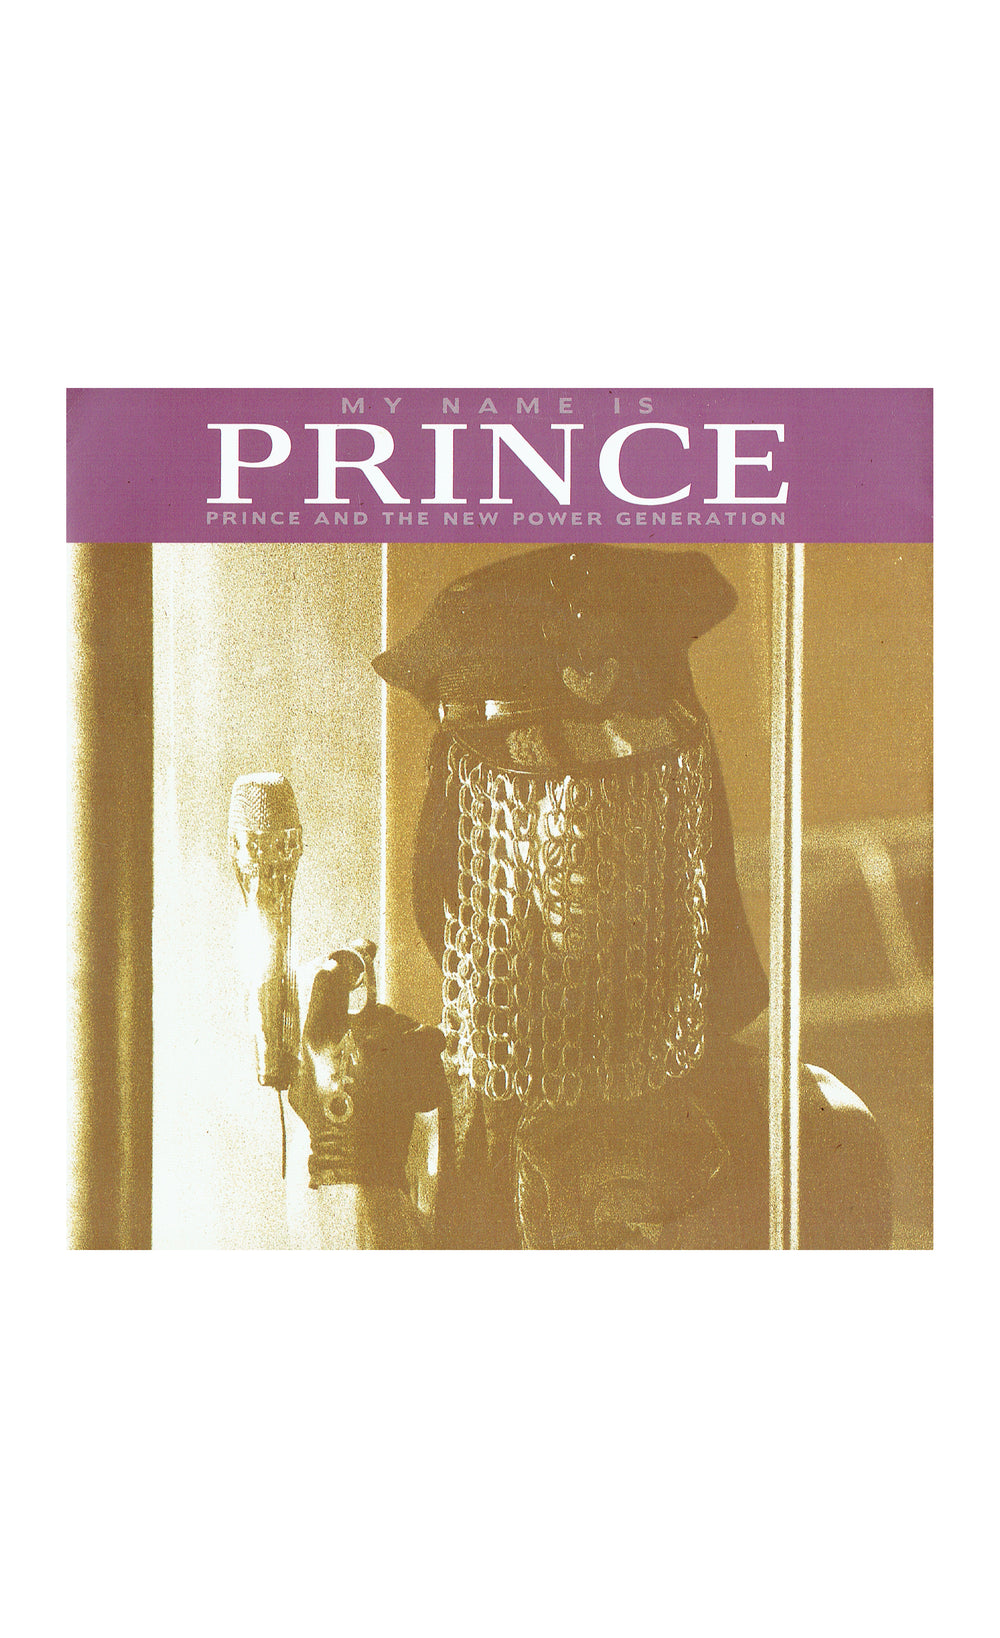 Prince – & The New Power Generation – My Name Is Prince CD Single Promo US Preloved: 1992